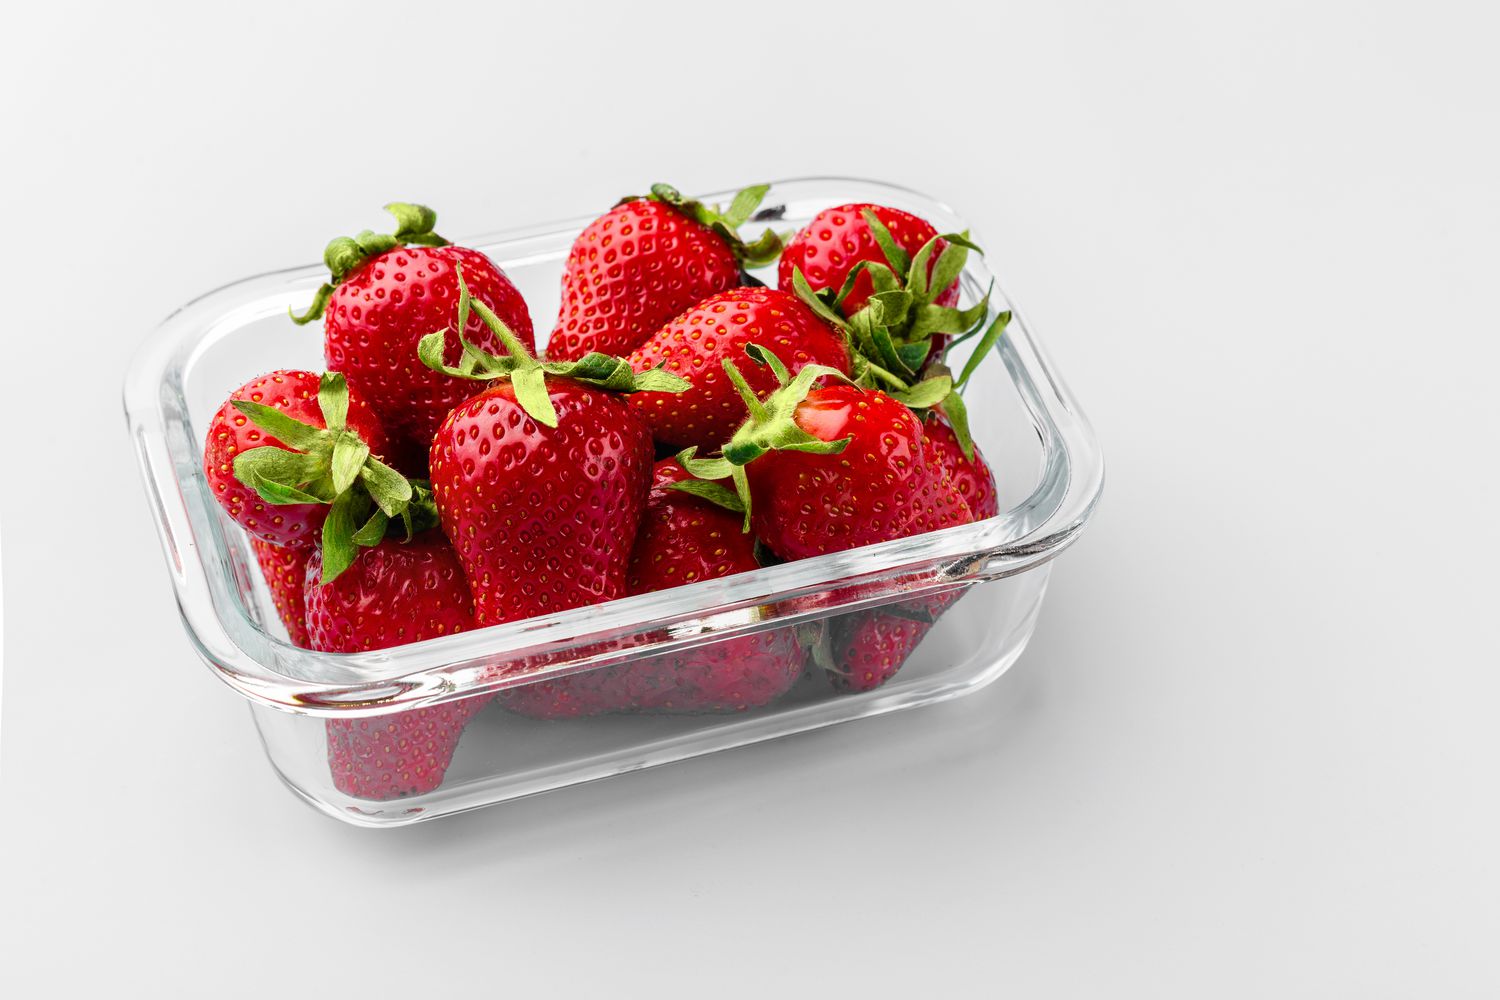 How To Store Strawberries To Keep Them Fresh